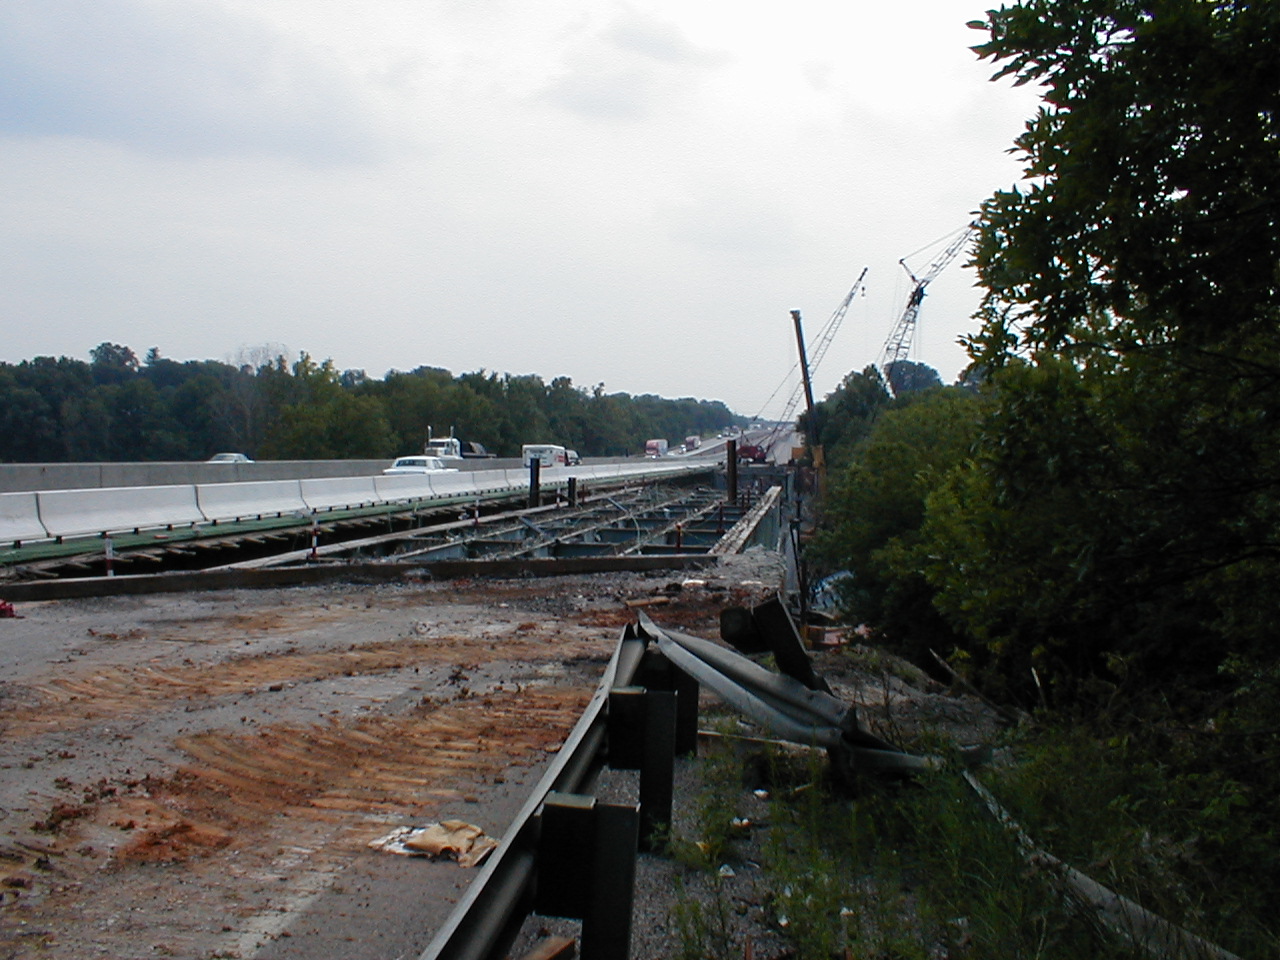 This shows the south bound bridge being dismantled. Traffic traveling in the temporary south bound lanes and old north bound lanes is visible.